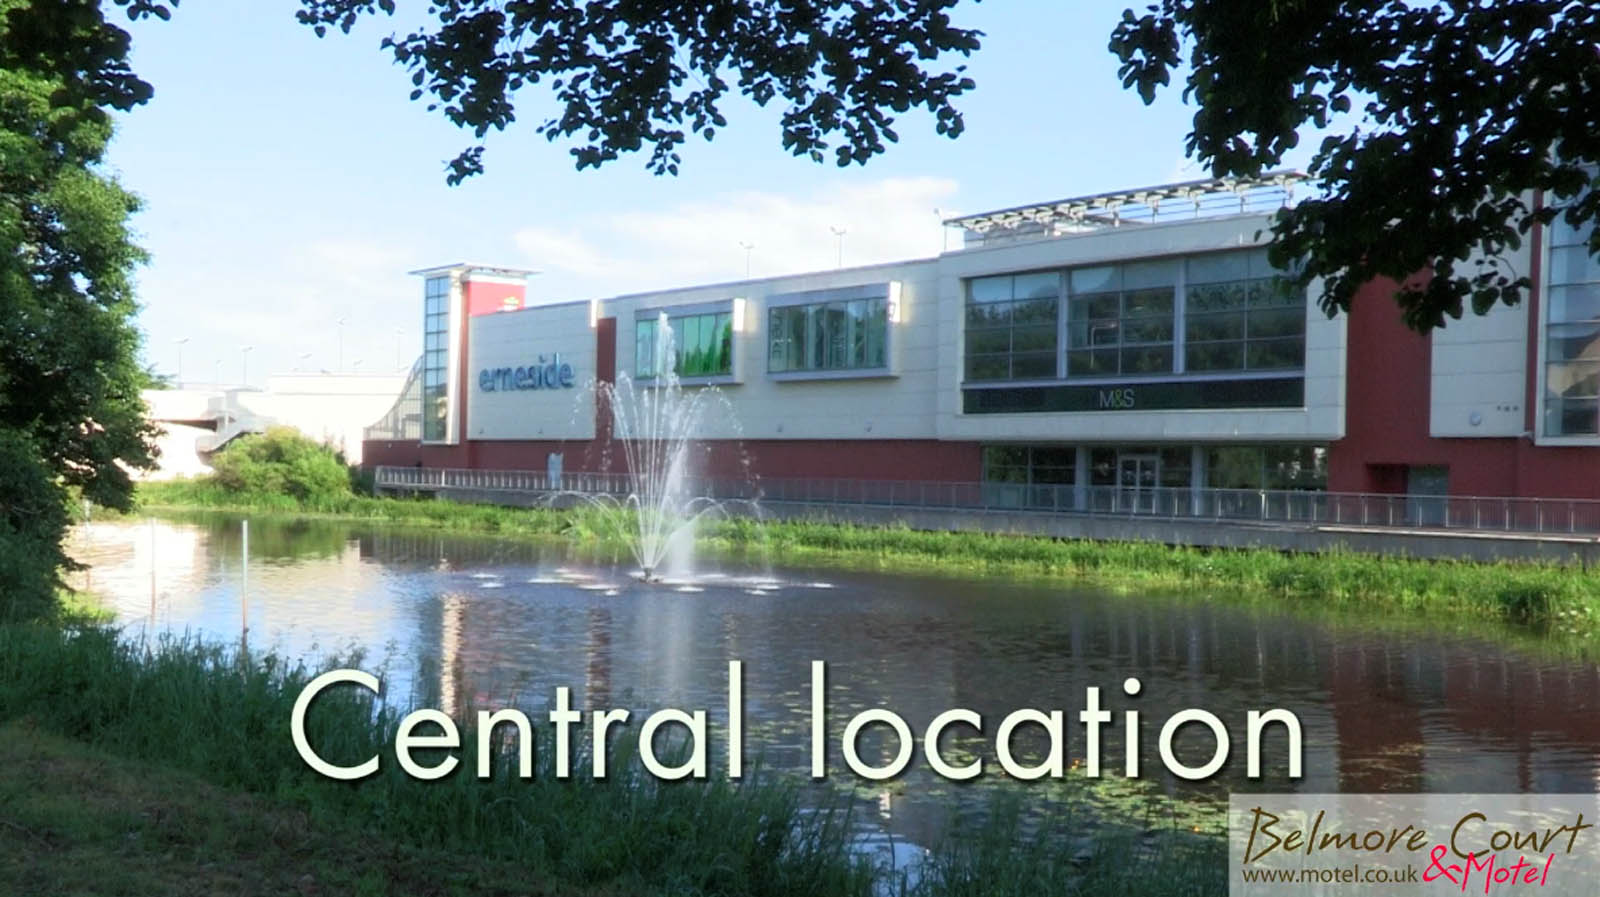 Hotel video production portfolio - Erneside Shopping Centre featured in hotel promo video by Bout Yeh video production Belfast, N. Ireland